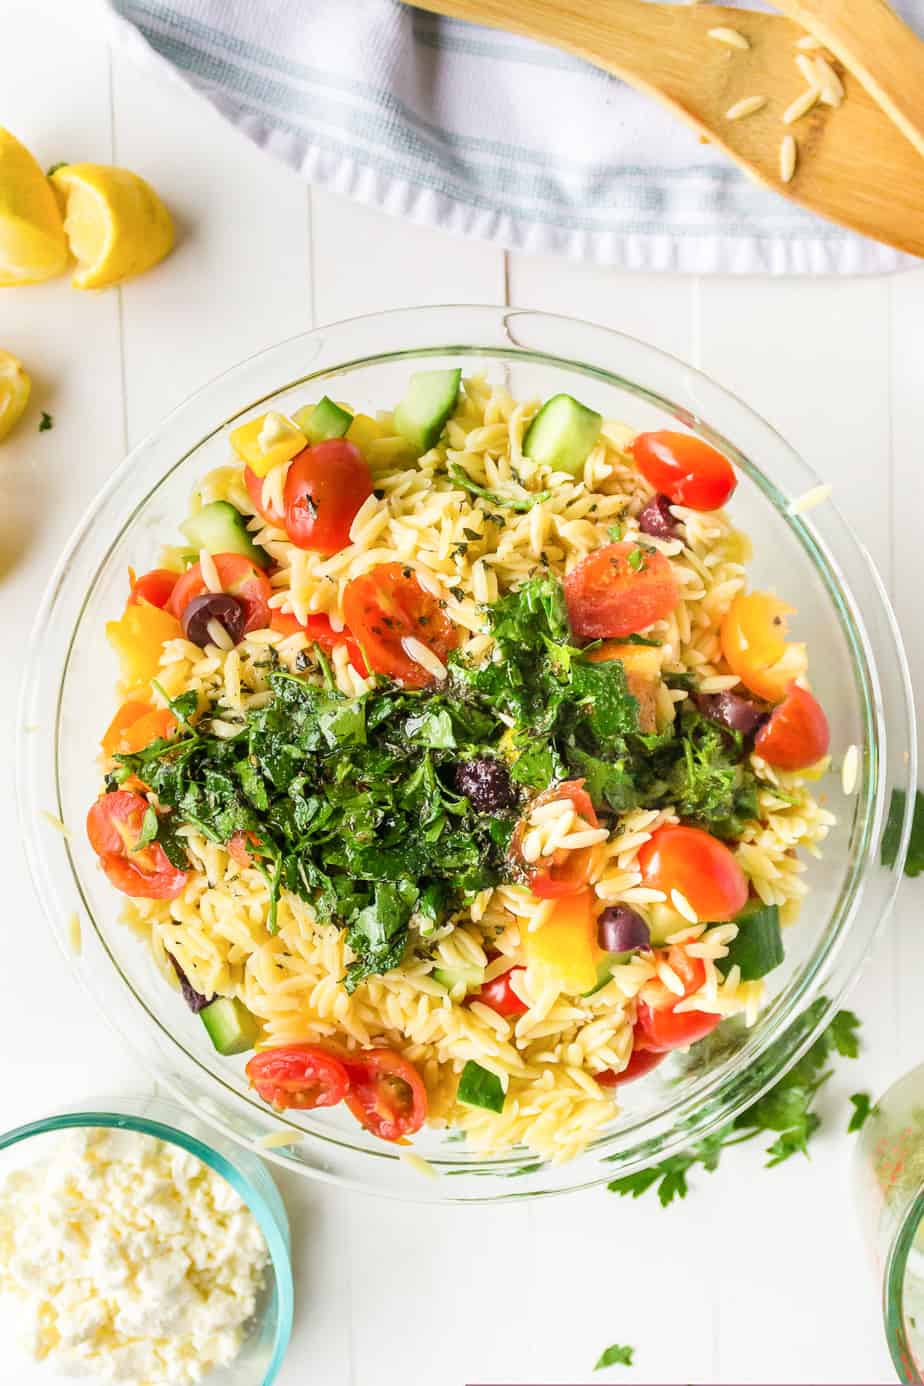 Adding fresh herbs and dressing to a bowl of orzo mixed with vegetables from overhead